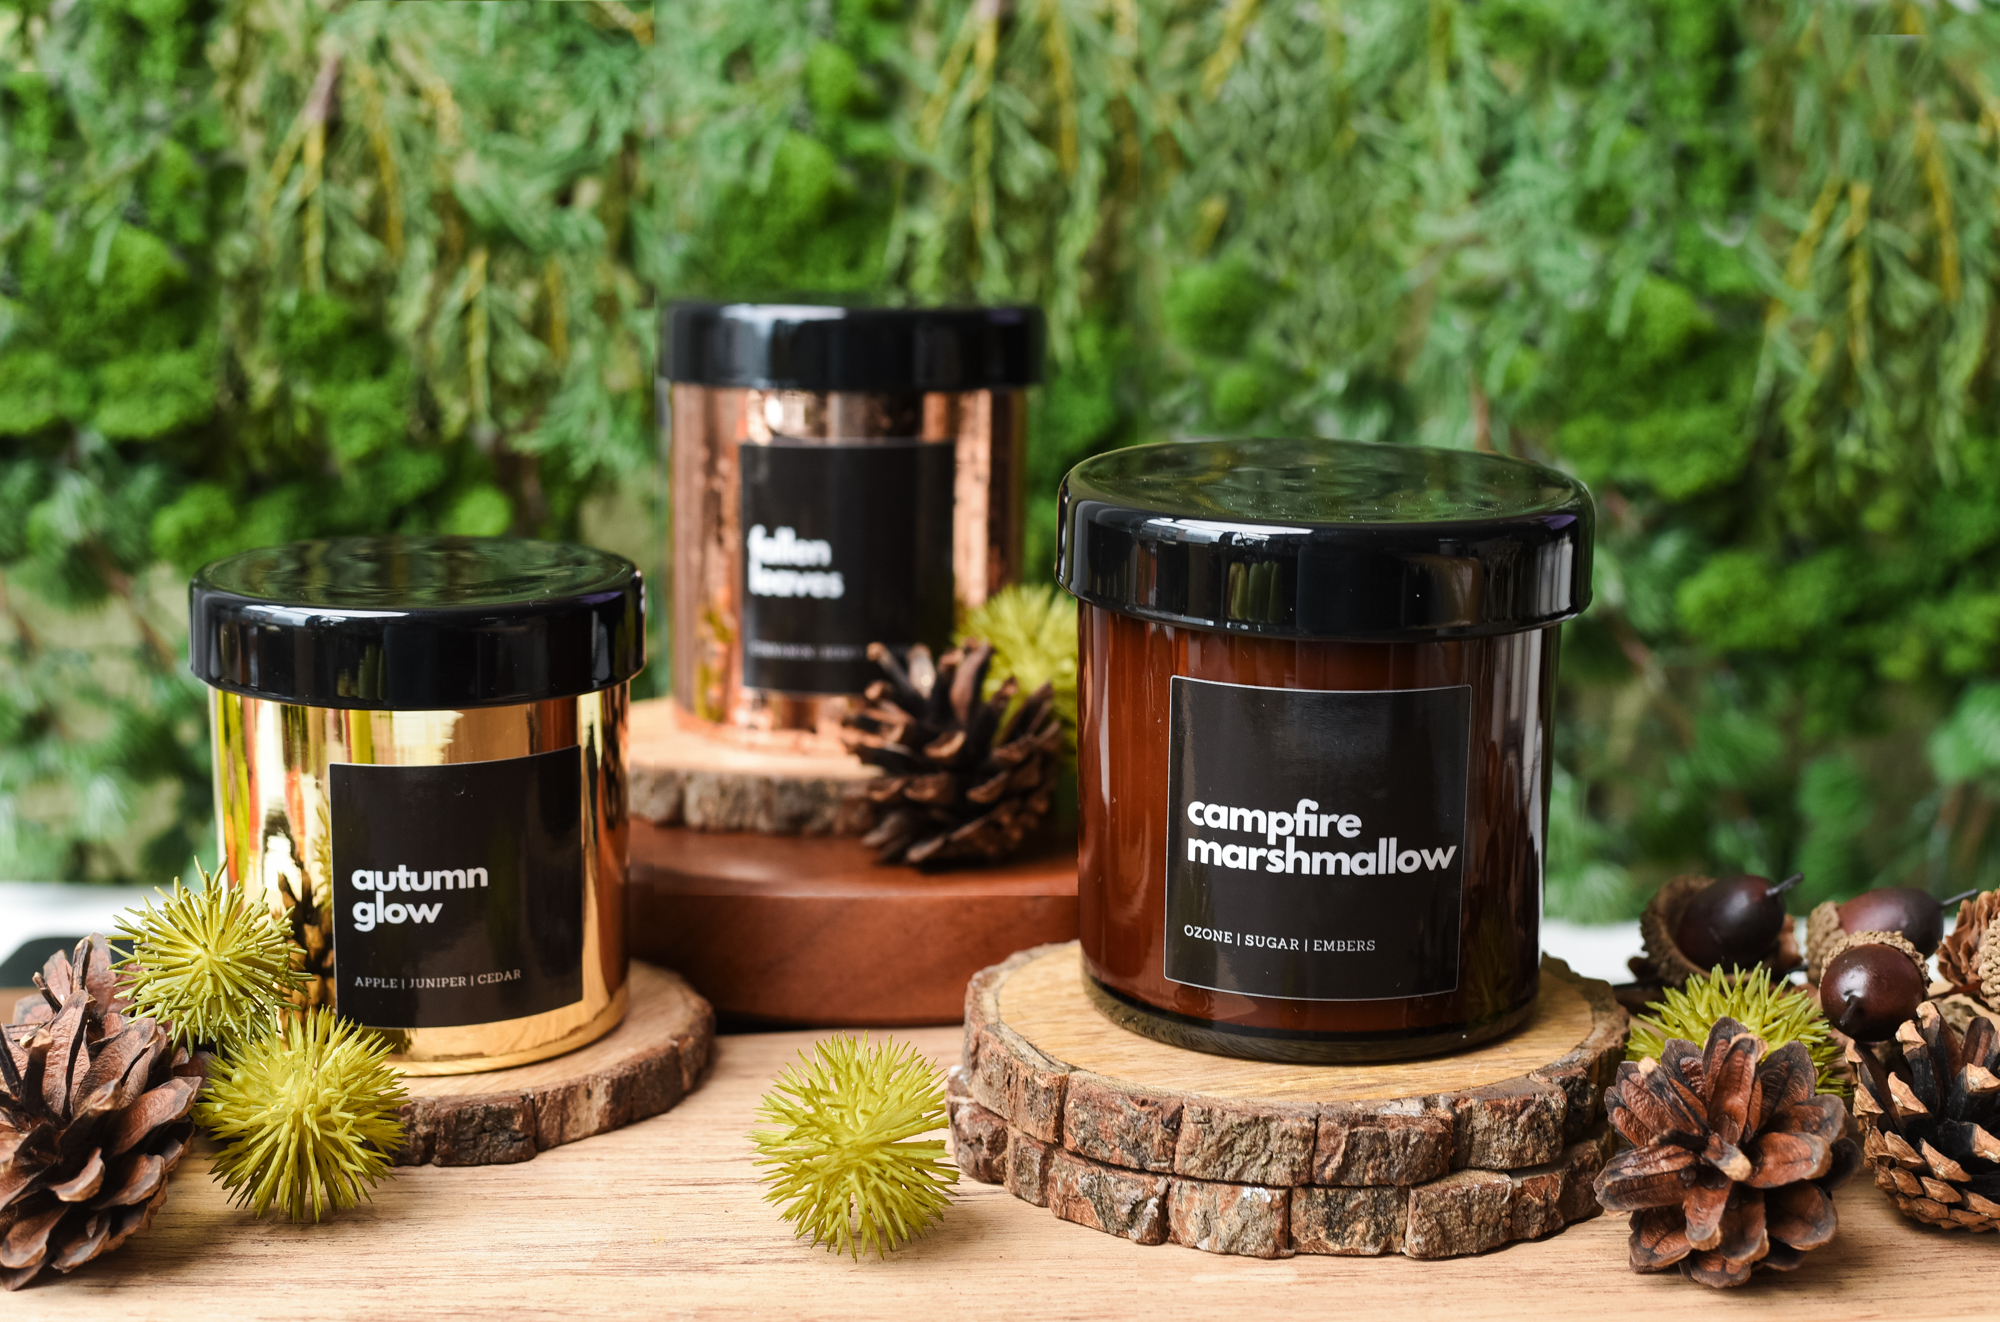 Fall inspired candles in woods.